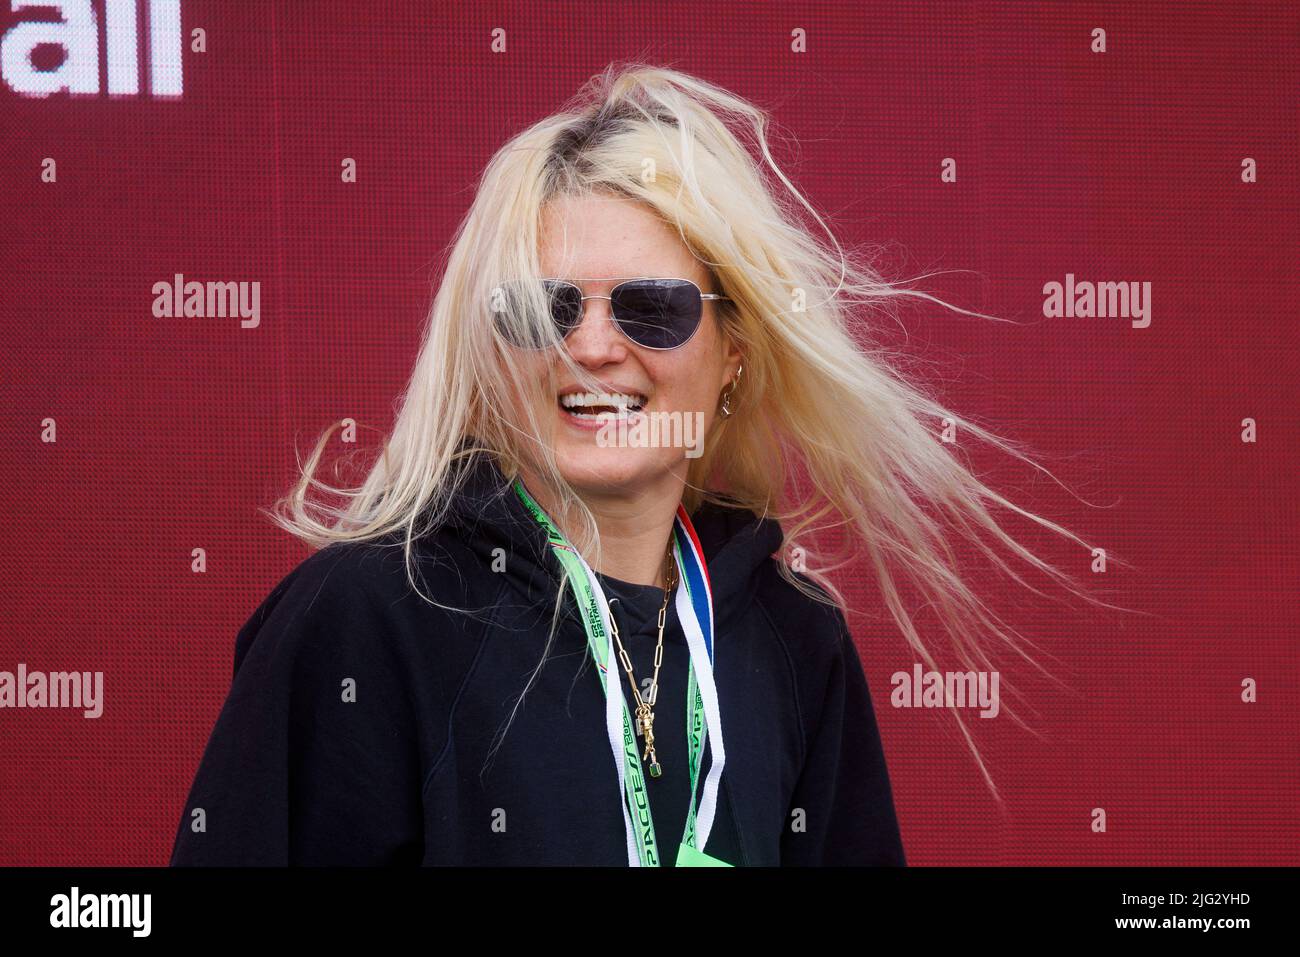 US rocker Alison Mosshart is photographed on the podium by Damian Lewis shortly after Carlos Sainz celebrated winning his first ever F1 Grand Prix at Stock Photo